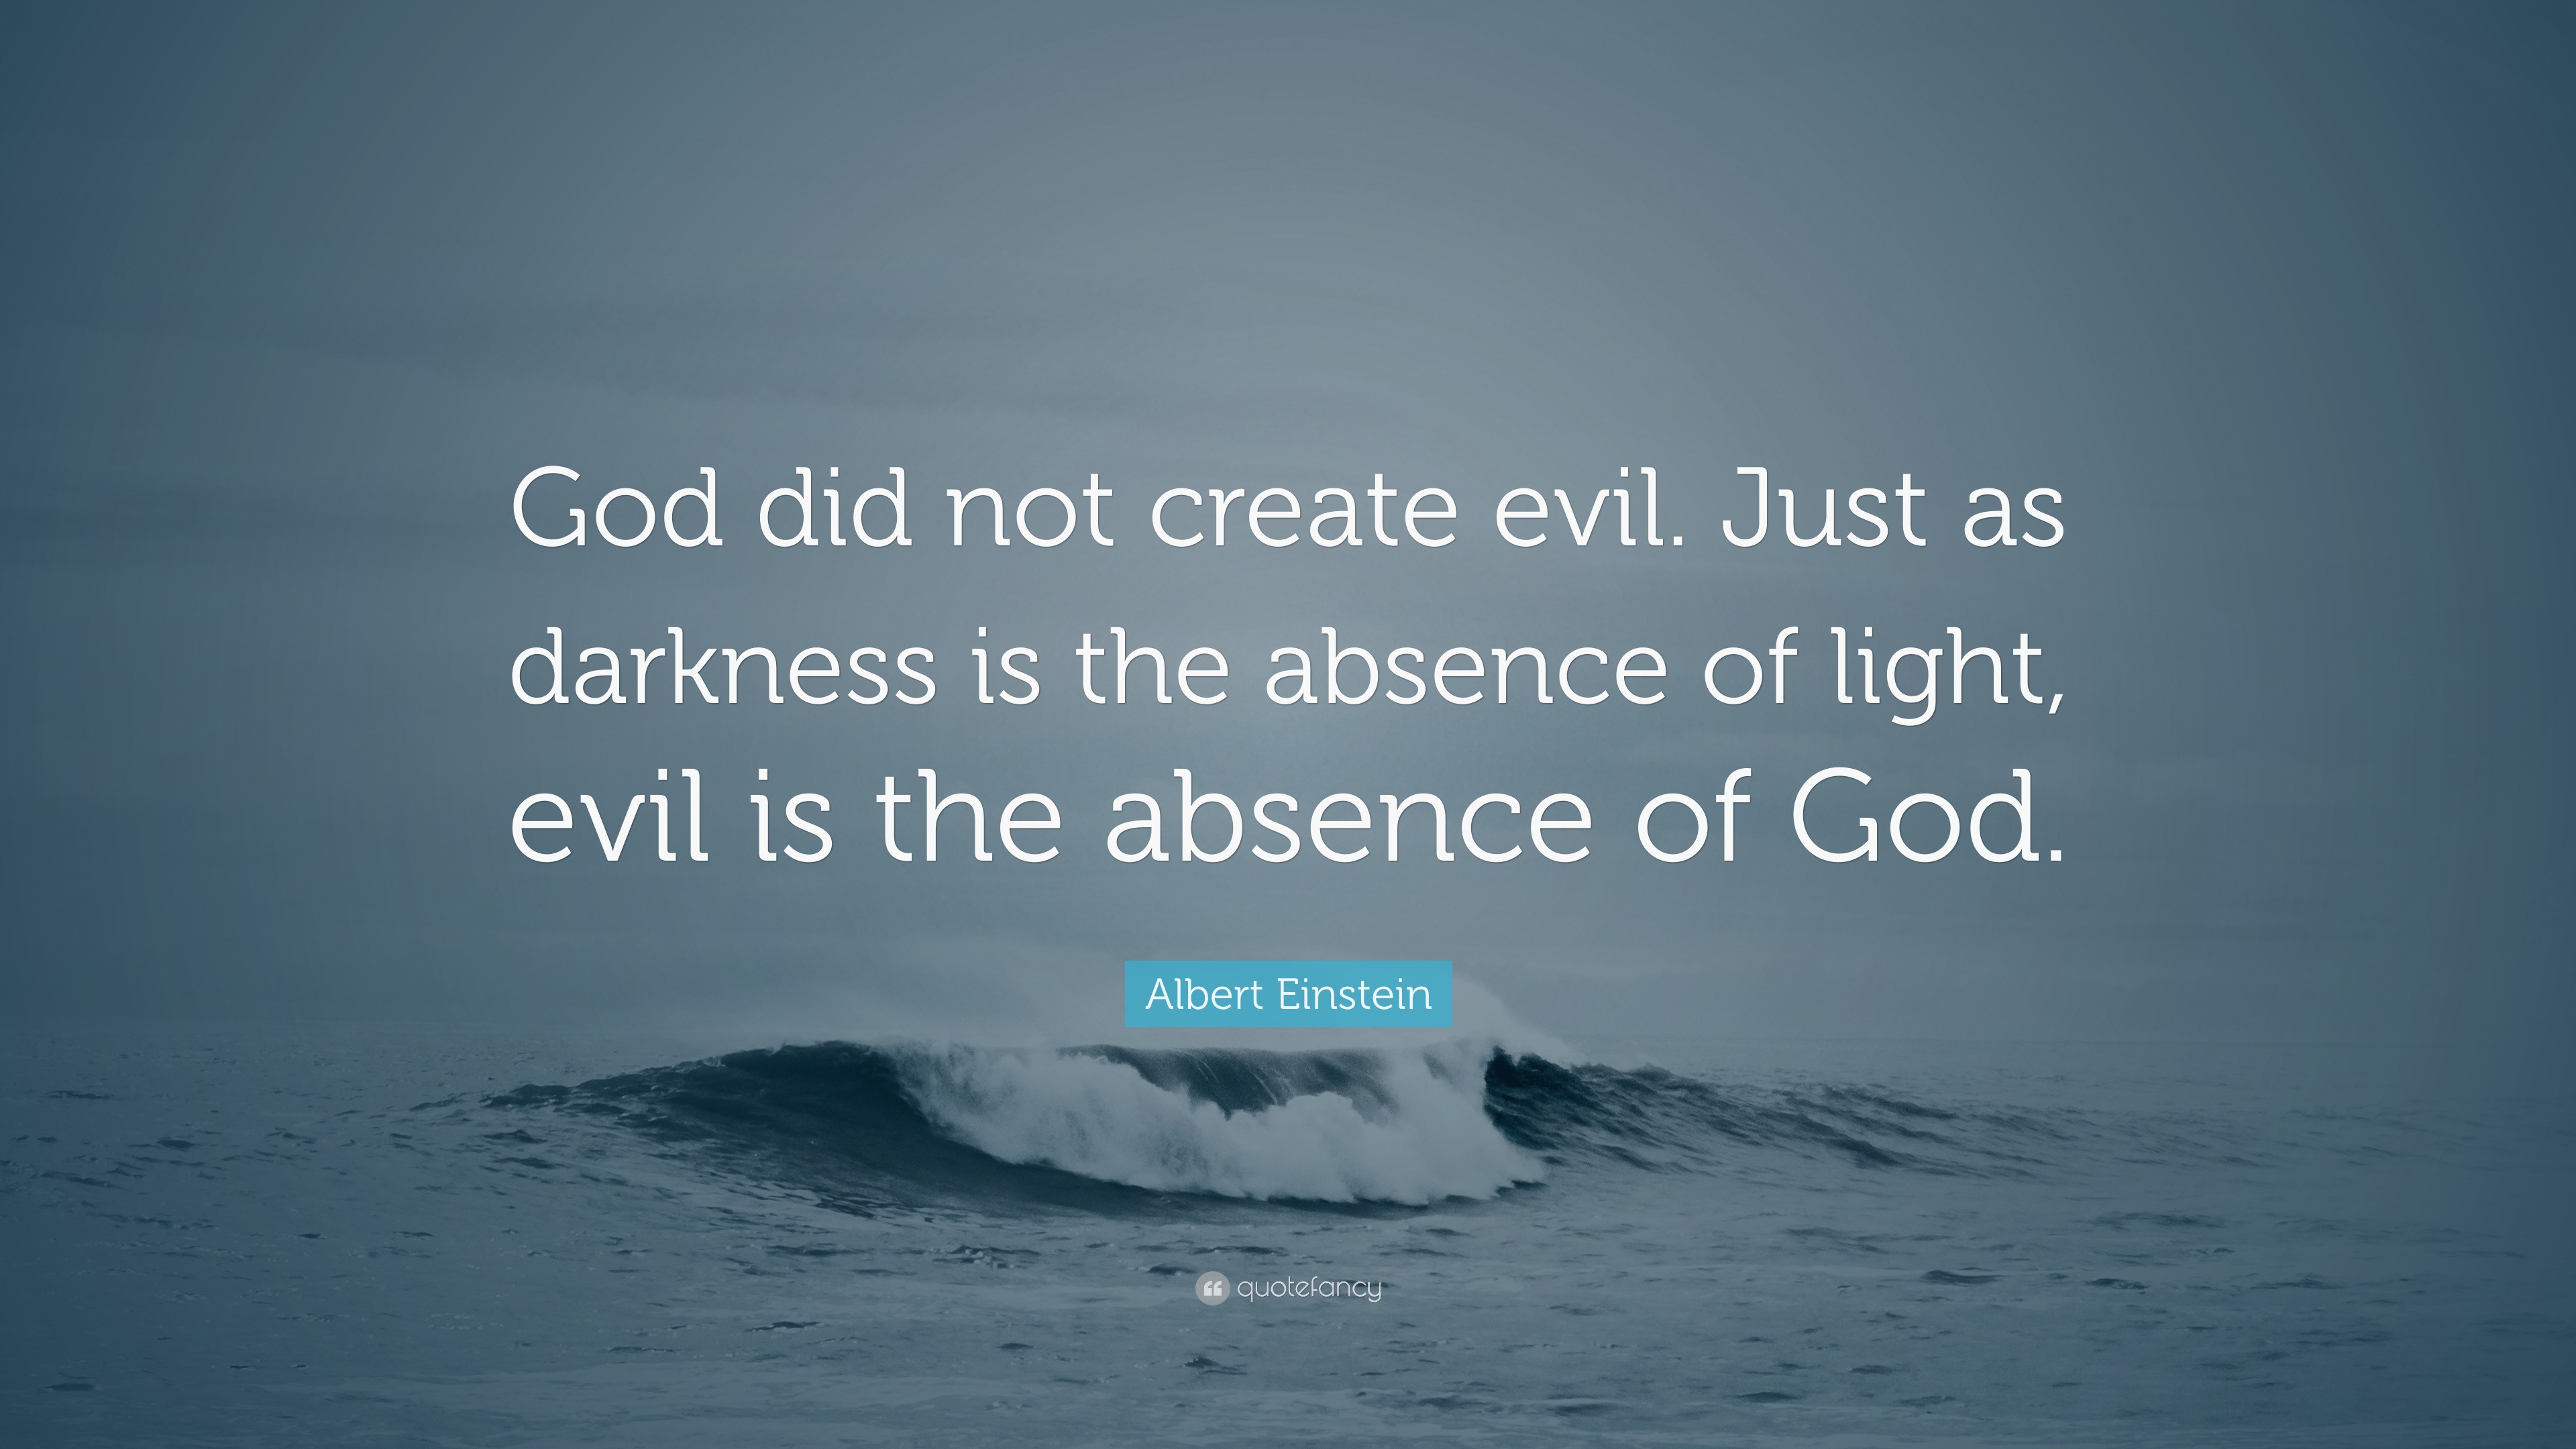 Albert Einstein Quote “god Did Not Create Evil Just As Darkness Is The Absence Of Light Evil